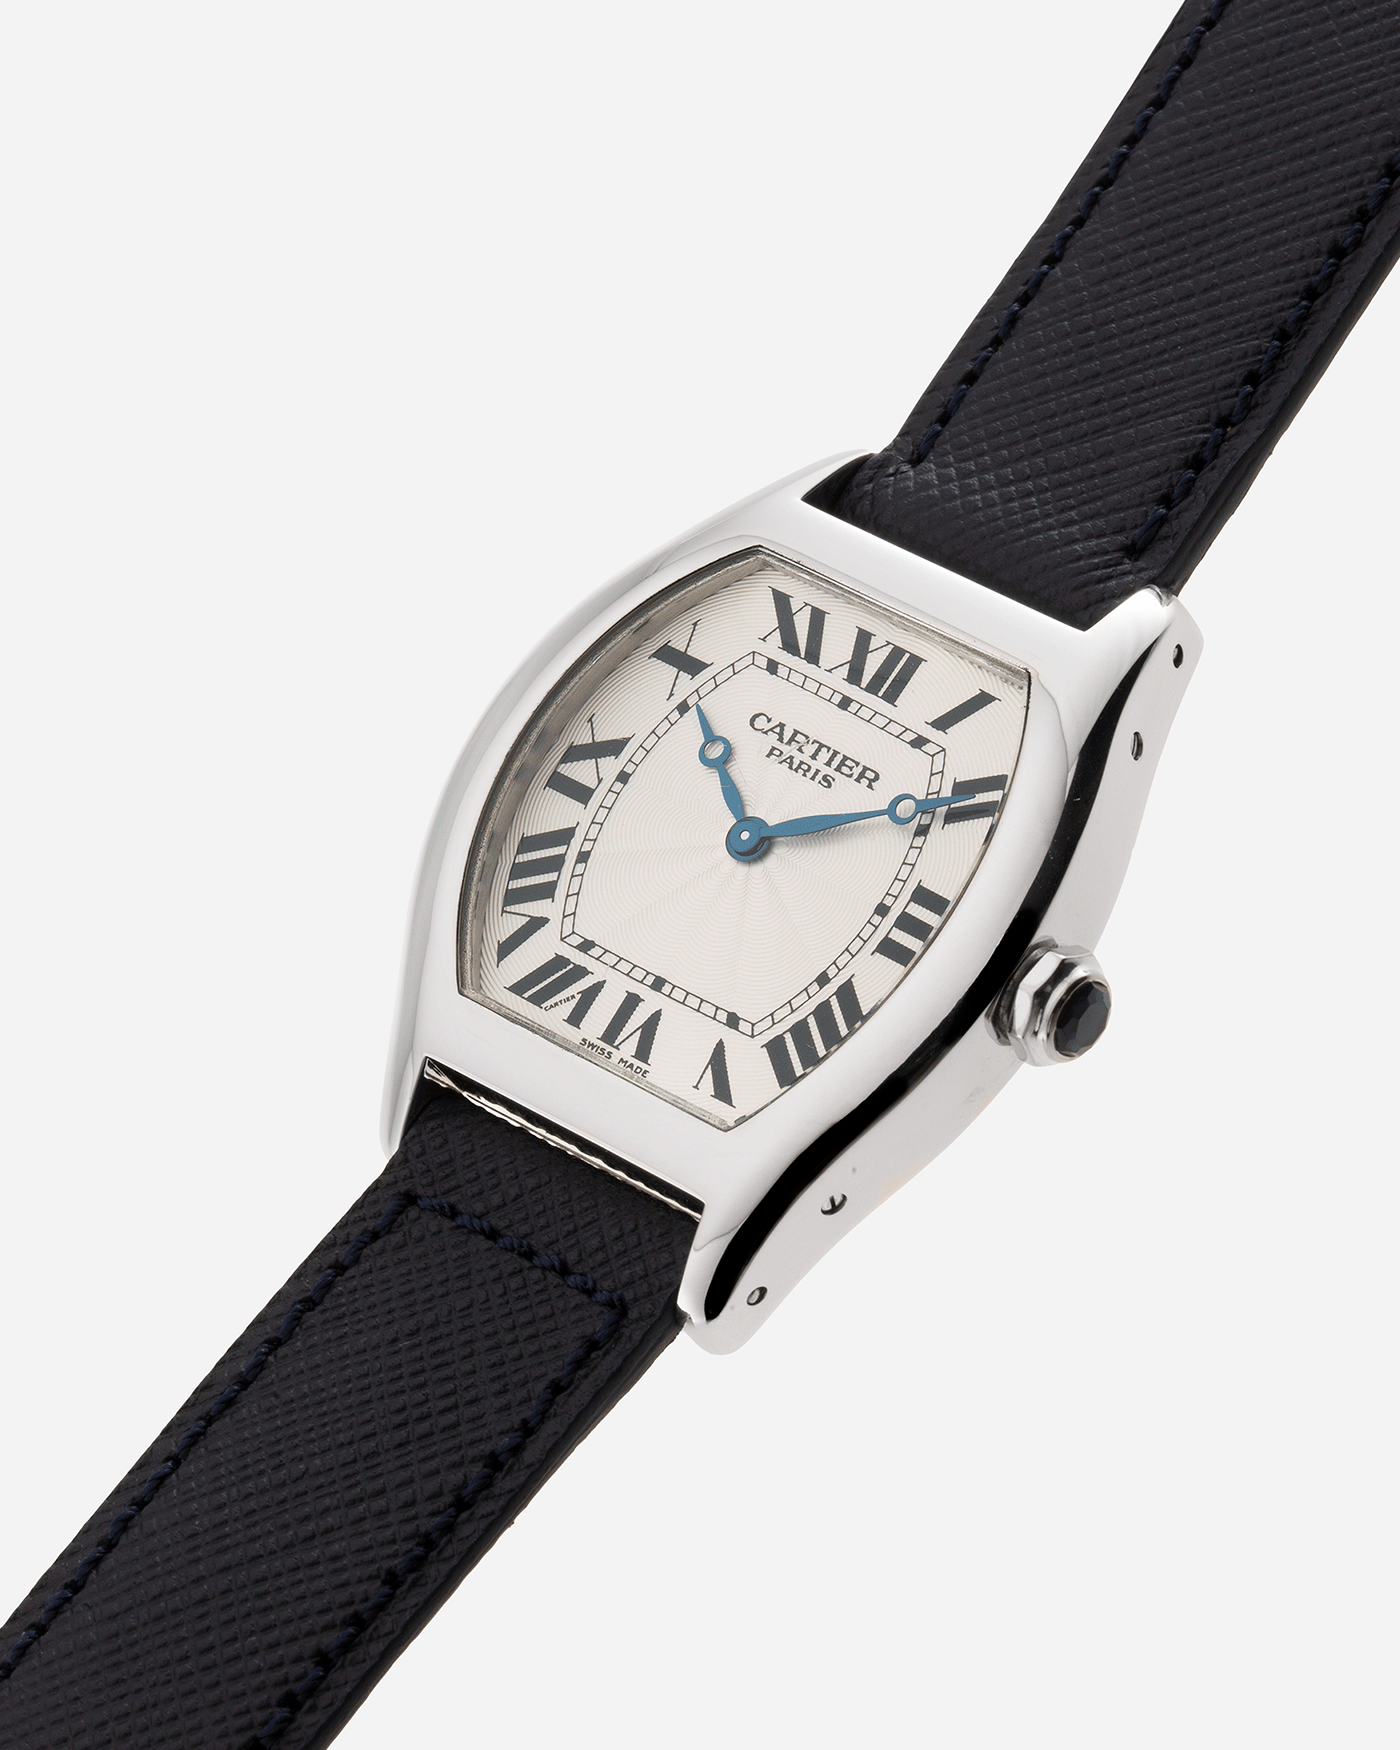 Brand: Cartier Year: 2000’s Model: CPCP Collection Prive Tortue Reference: 2518 Material: Platinum Movement: Cartier Jaeger LeCoultre 9601MC Case Diameter: 43 x 35 mm Strap: Navy Blue Molequin Textured Calf Strap with 18k White Gold Deployant